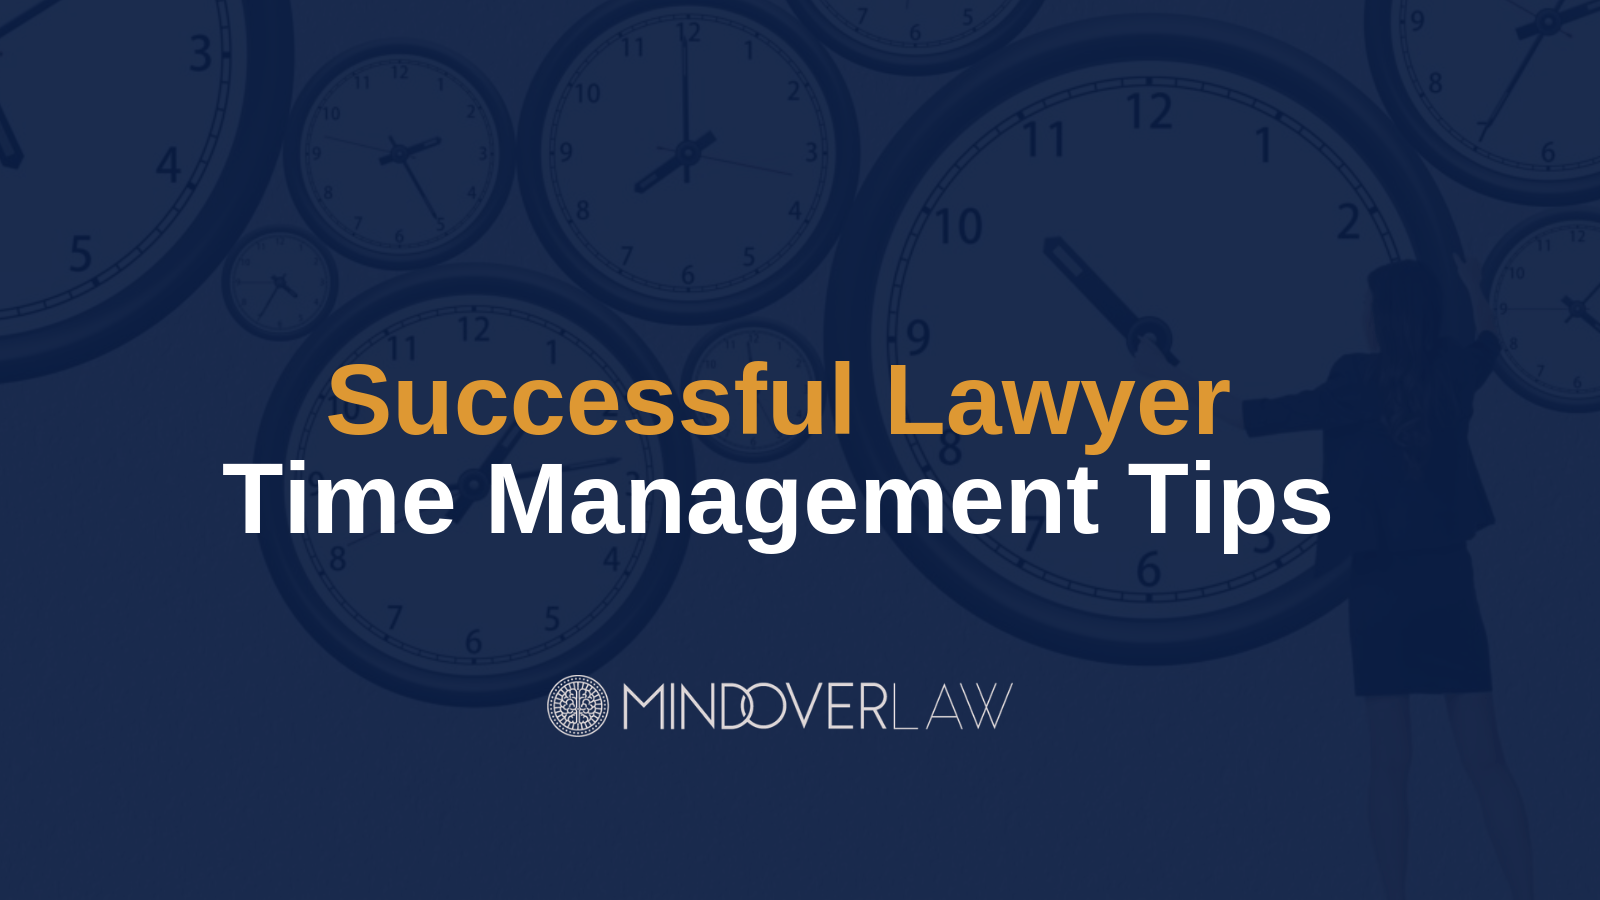 Successful Lawyer Time Management Tips - mind over law